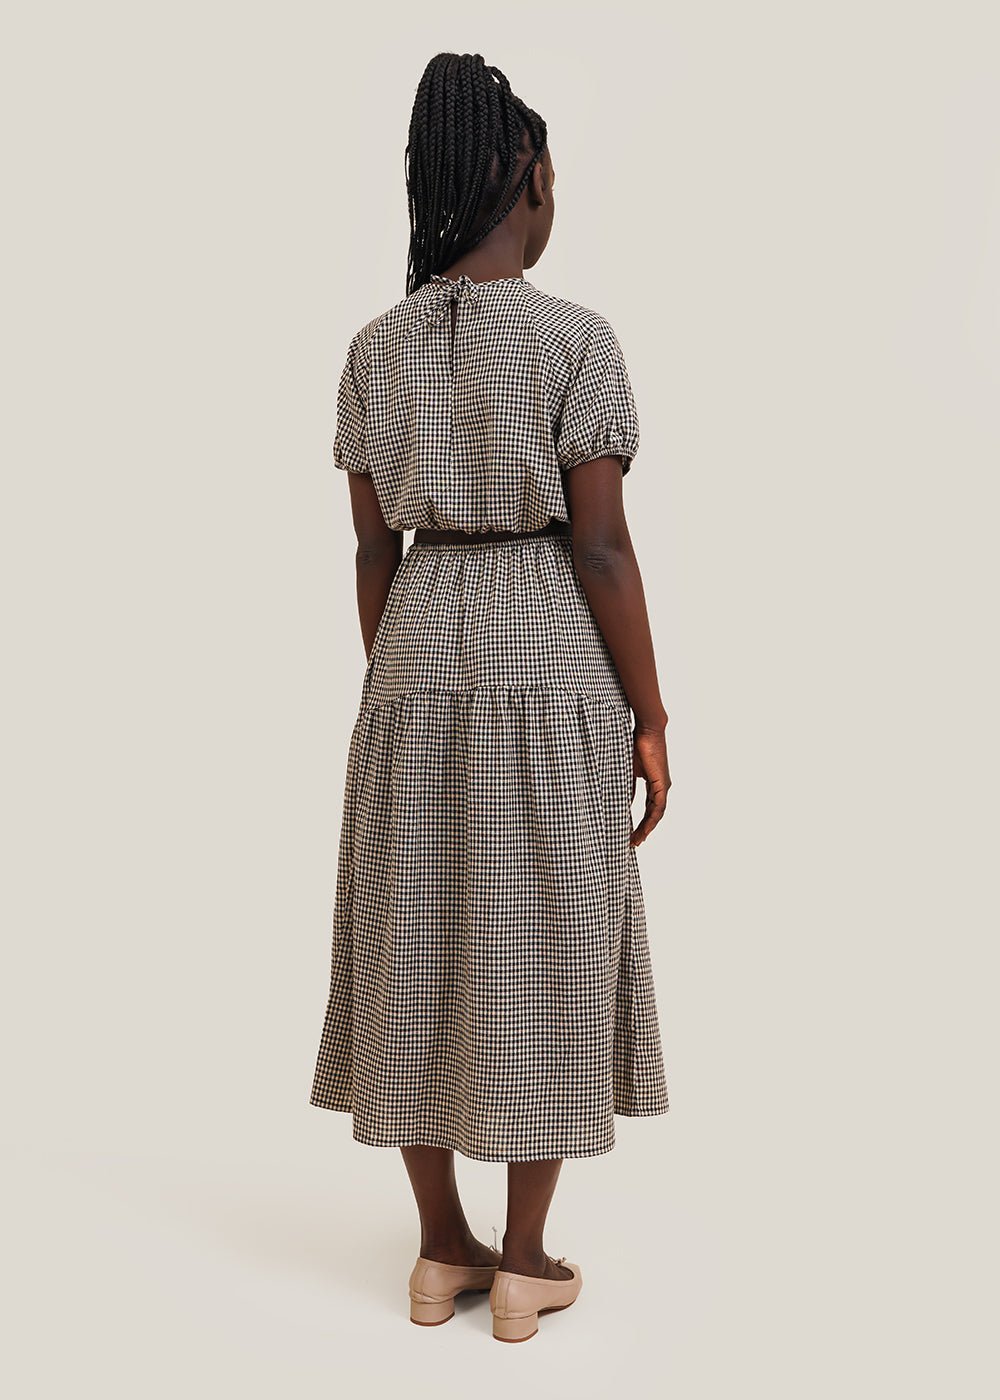 Bronze Age Dani Gingham Field Skirt - New Classics Studios Sustainable Ethical Fashion Canada